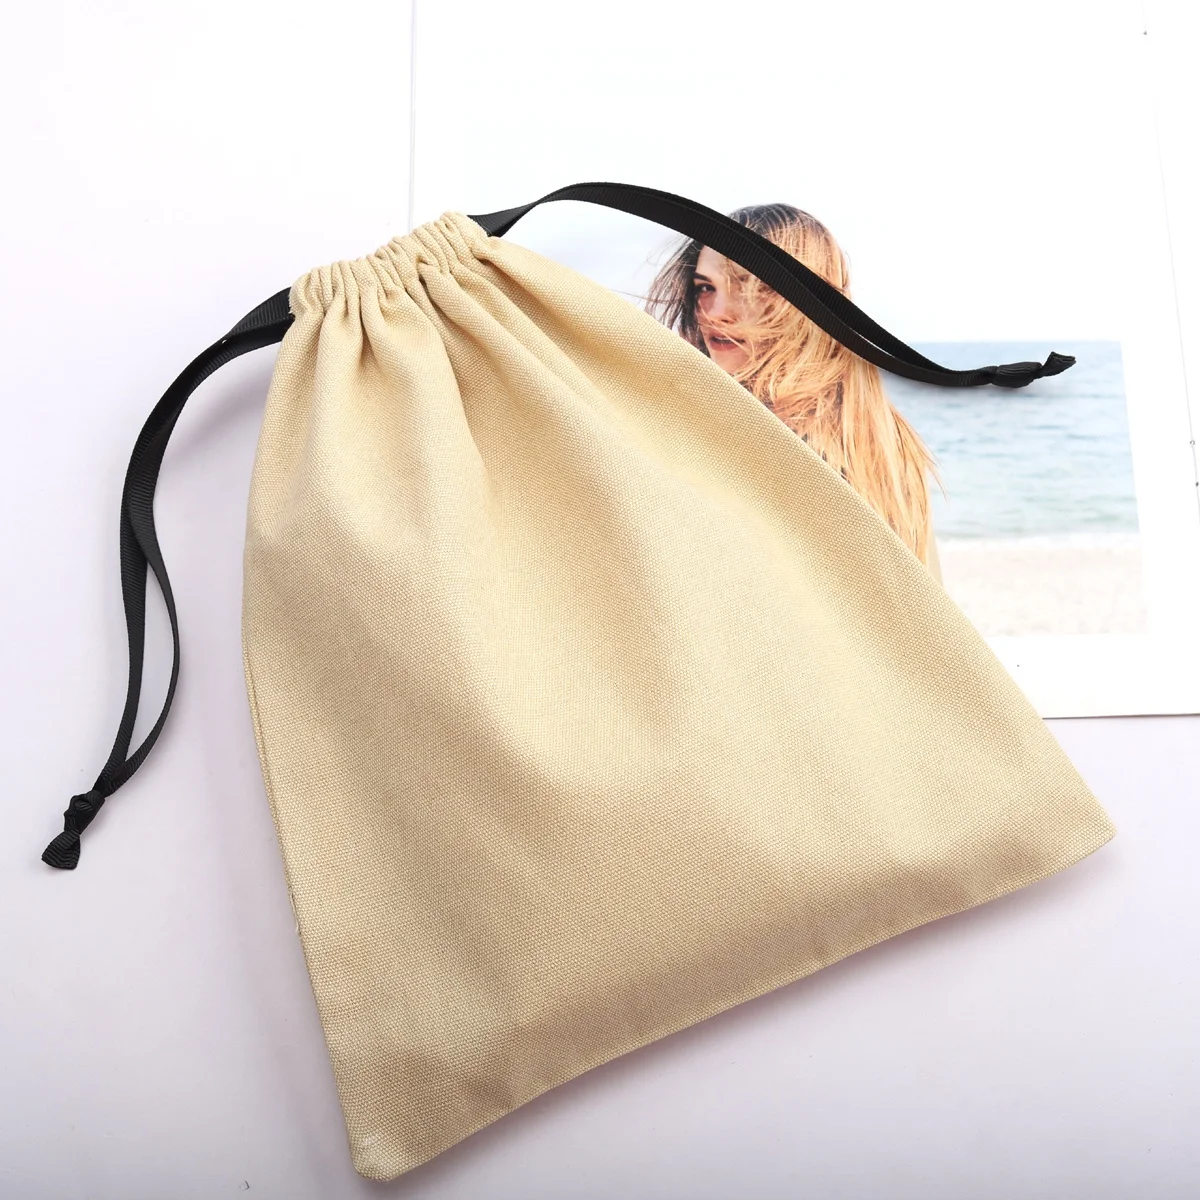 Eco-friendly 8oz Canvas Drawstring Candle Gift Packing Bag Hot Sale Soild Cotton Cosmetic Makeup Pouch